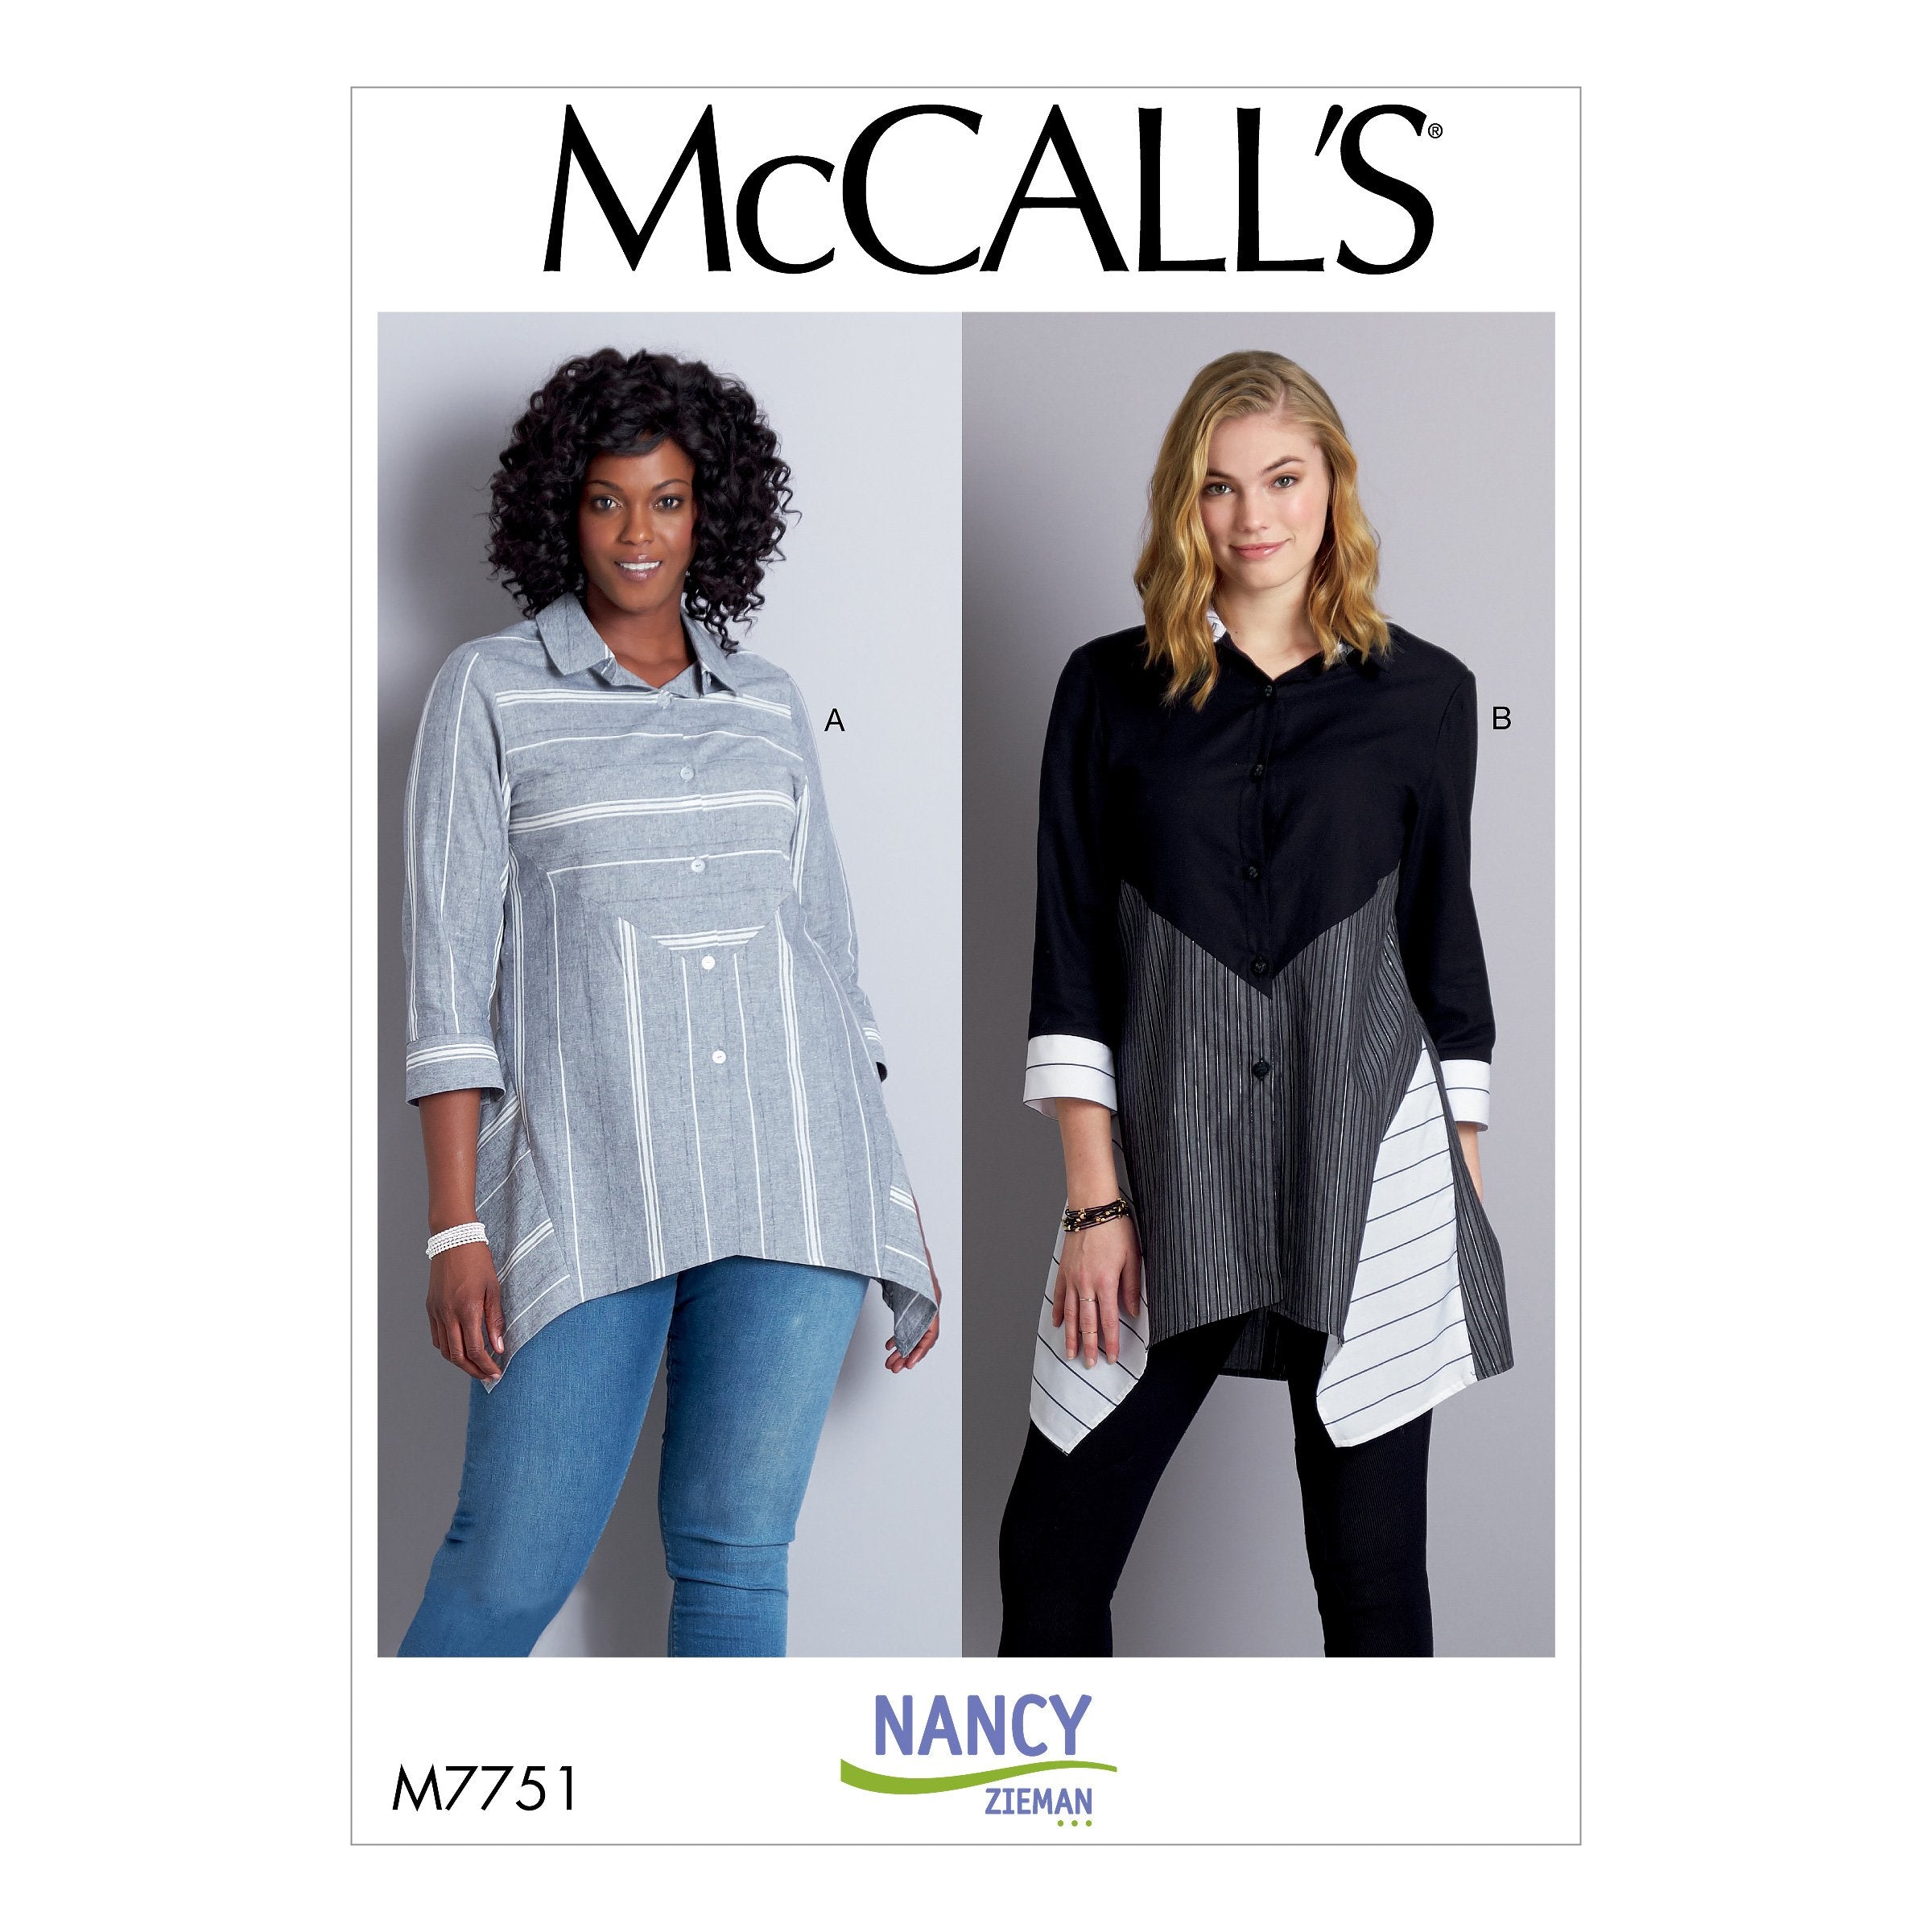 M7751 Misses' Shirts Pattern from Jaycotts Sewing Supplies